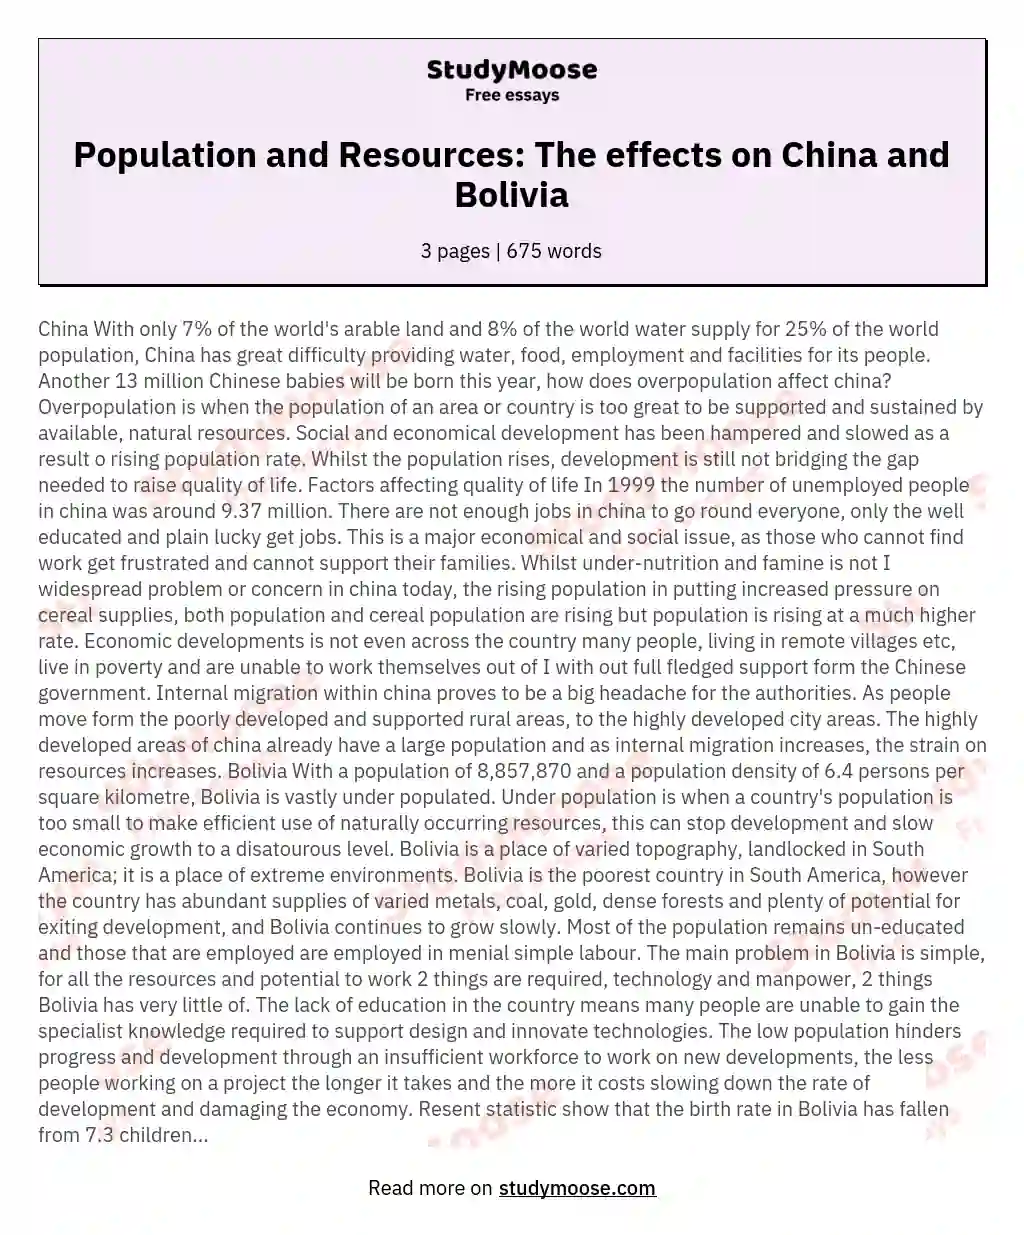 Population and Resources: The effects on China and Bolivia essay